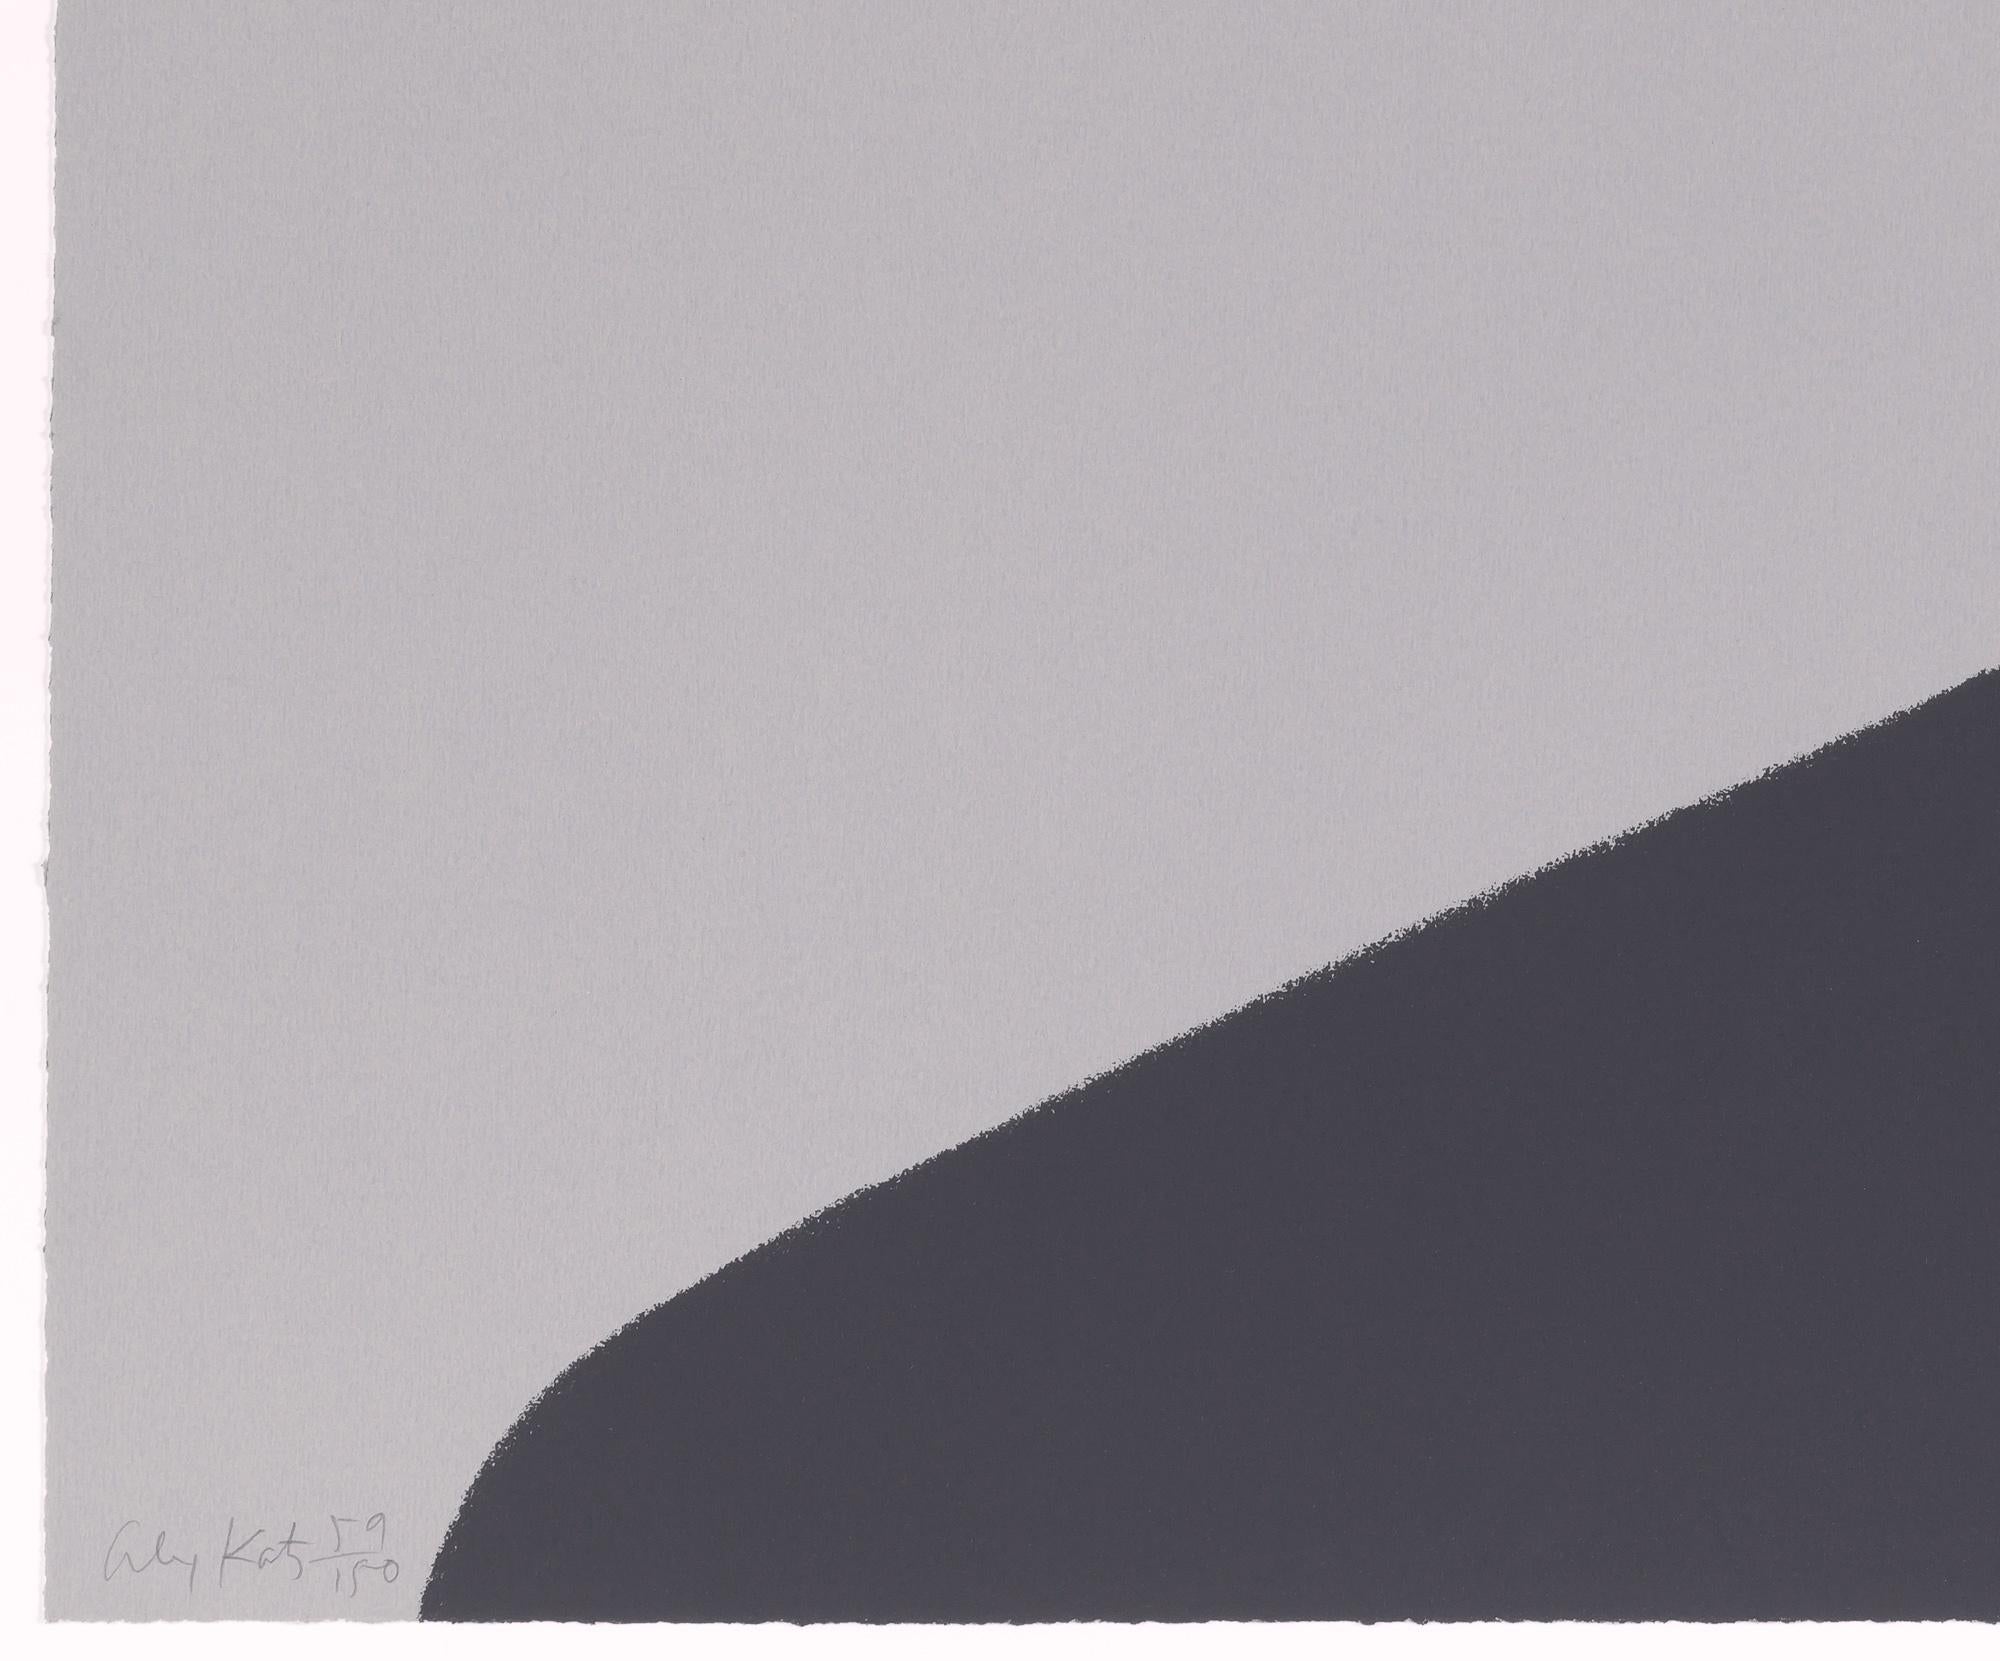 Self-portrait (Passing), 1990, Screenprint by Alex Katz (Limited Edition of 150) For Sale 2